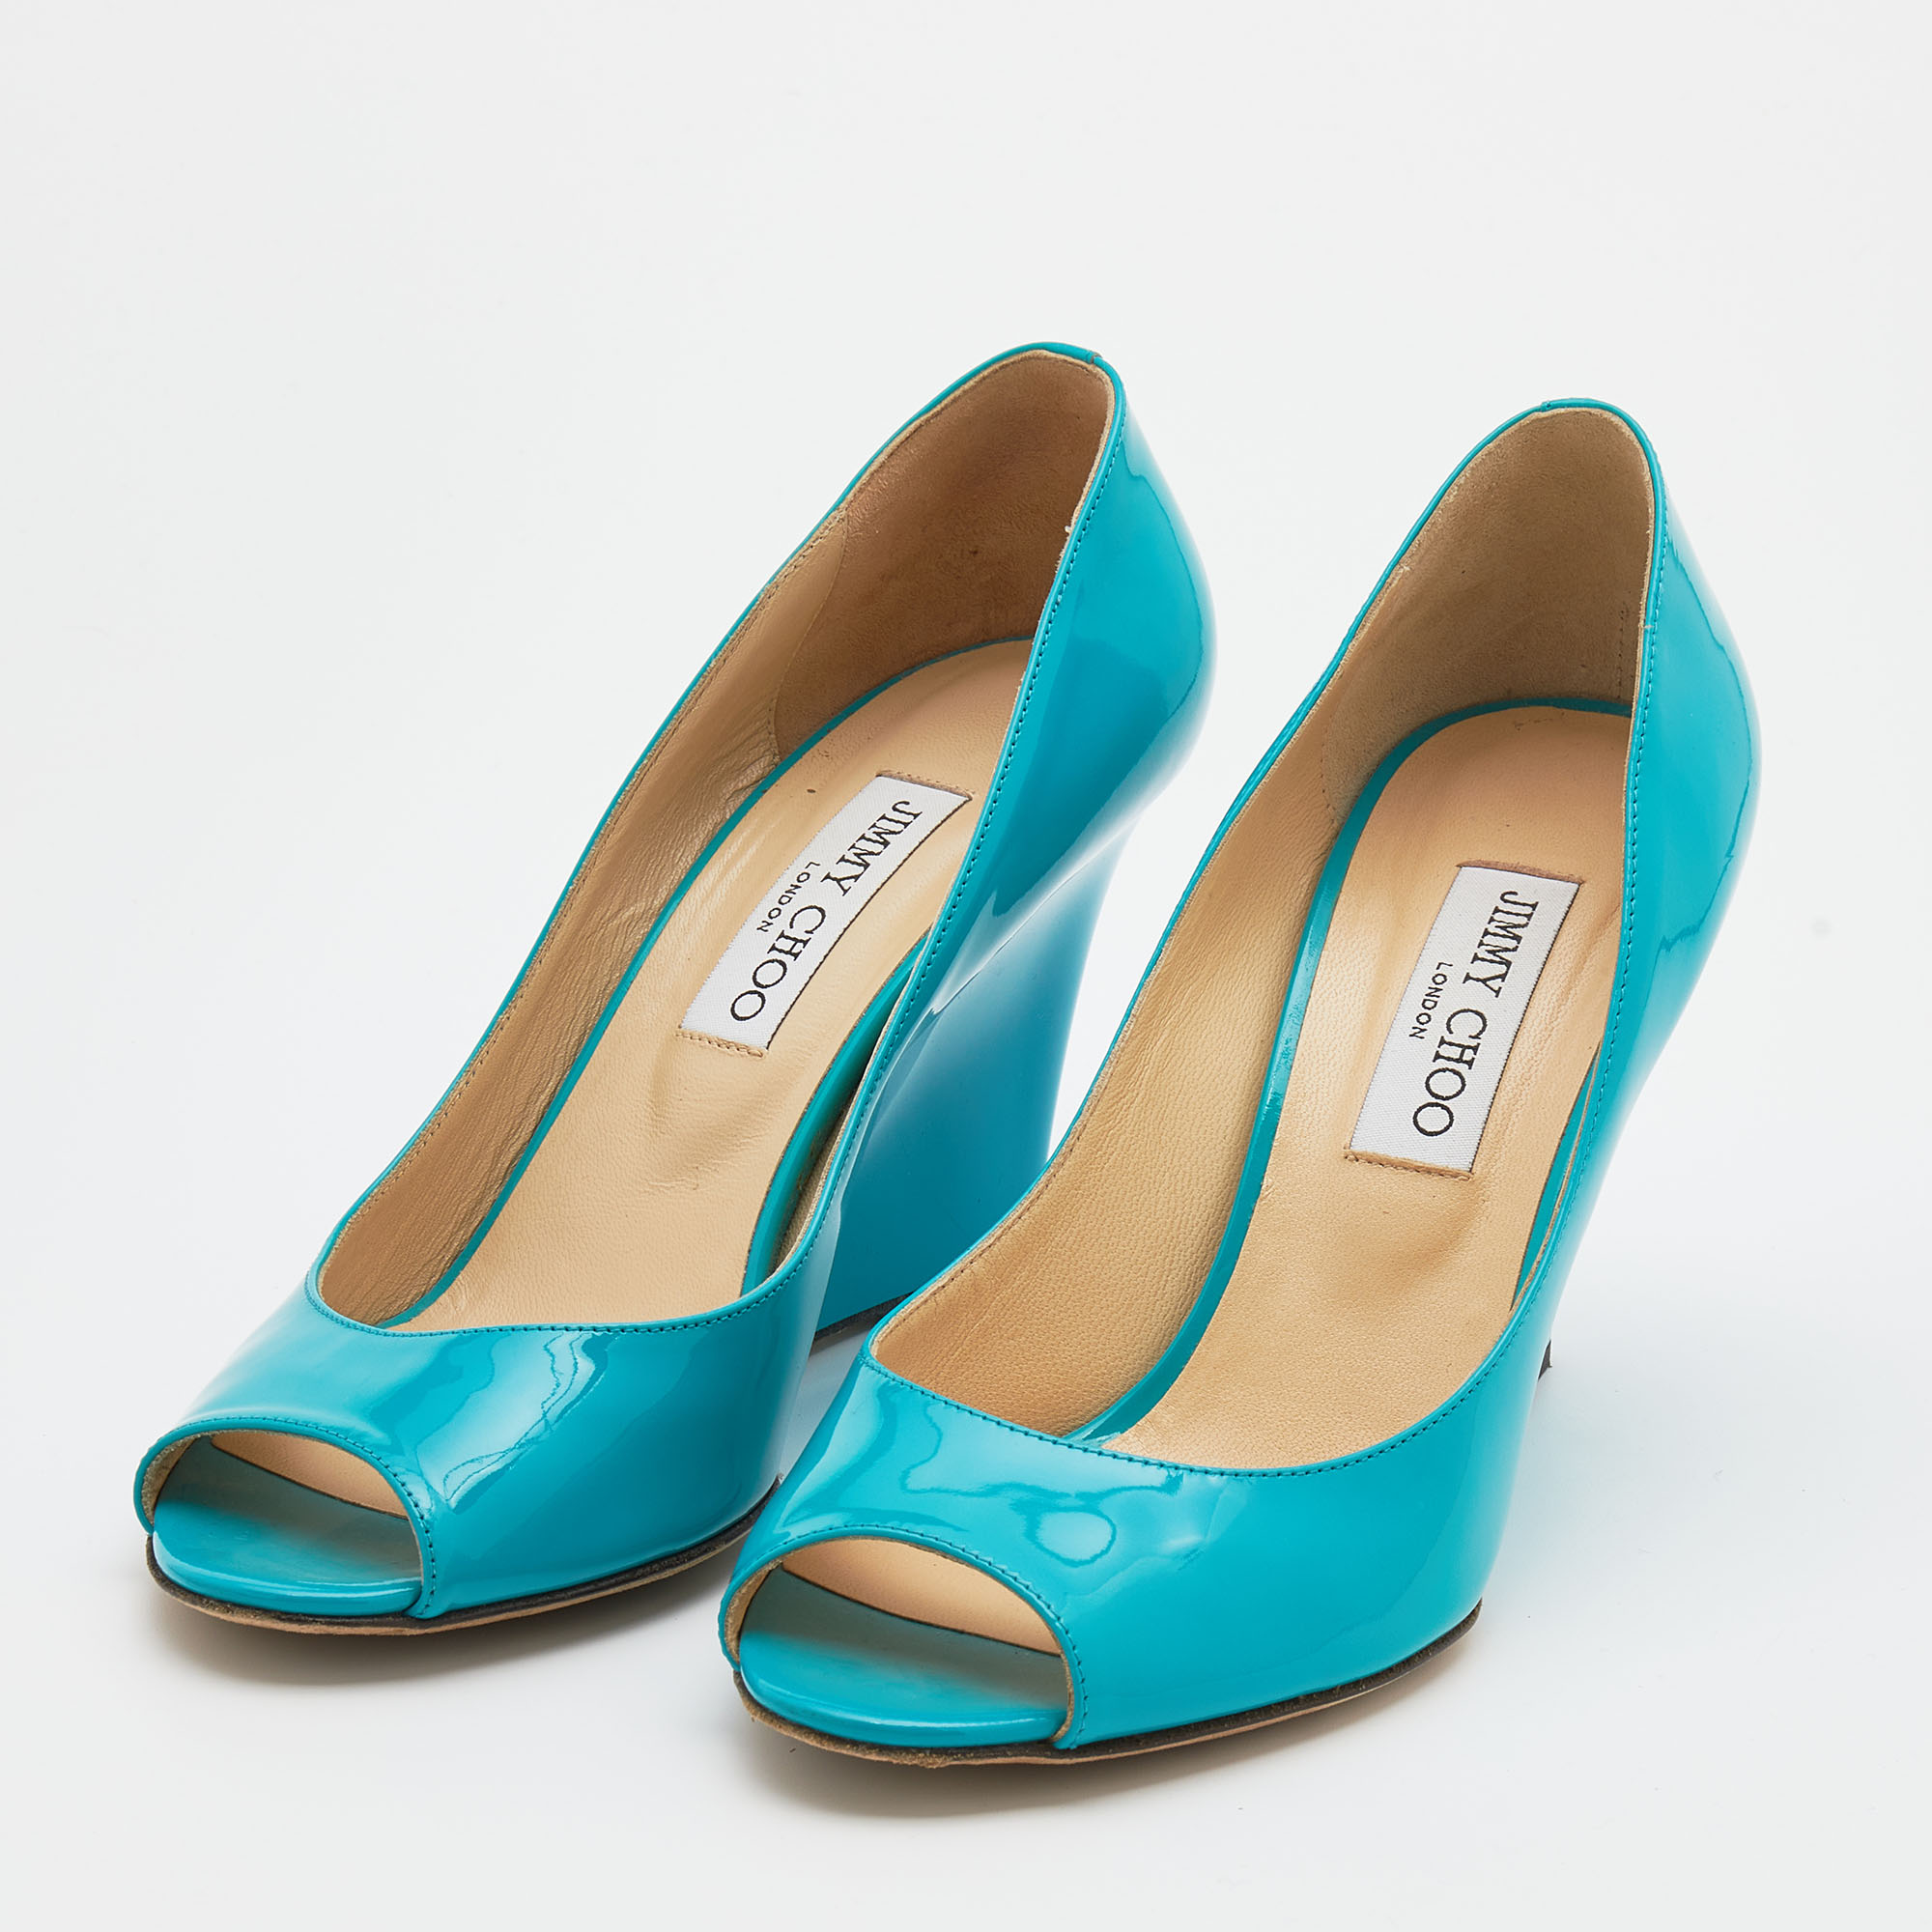 

Jimmy Choo Turquoise Patent Leather Bello Peep Toe Wedge Pumps Size, Blue